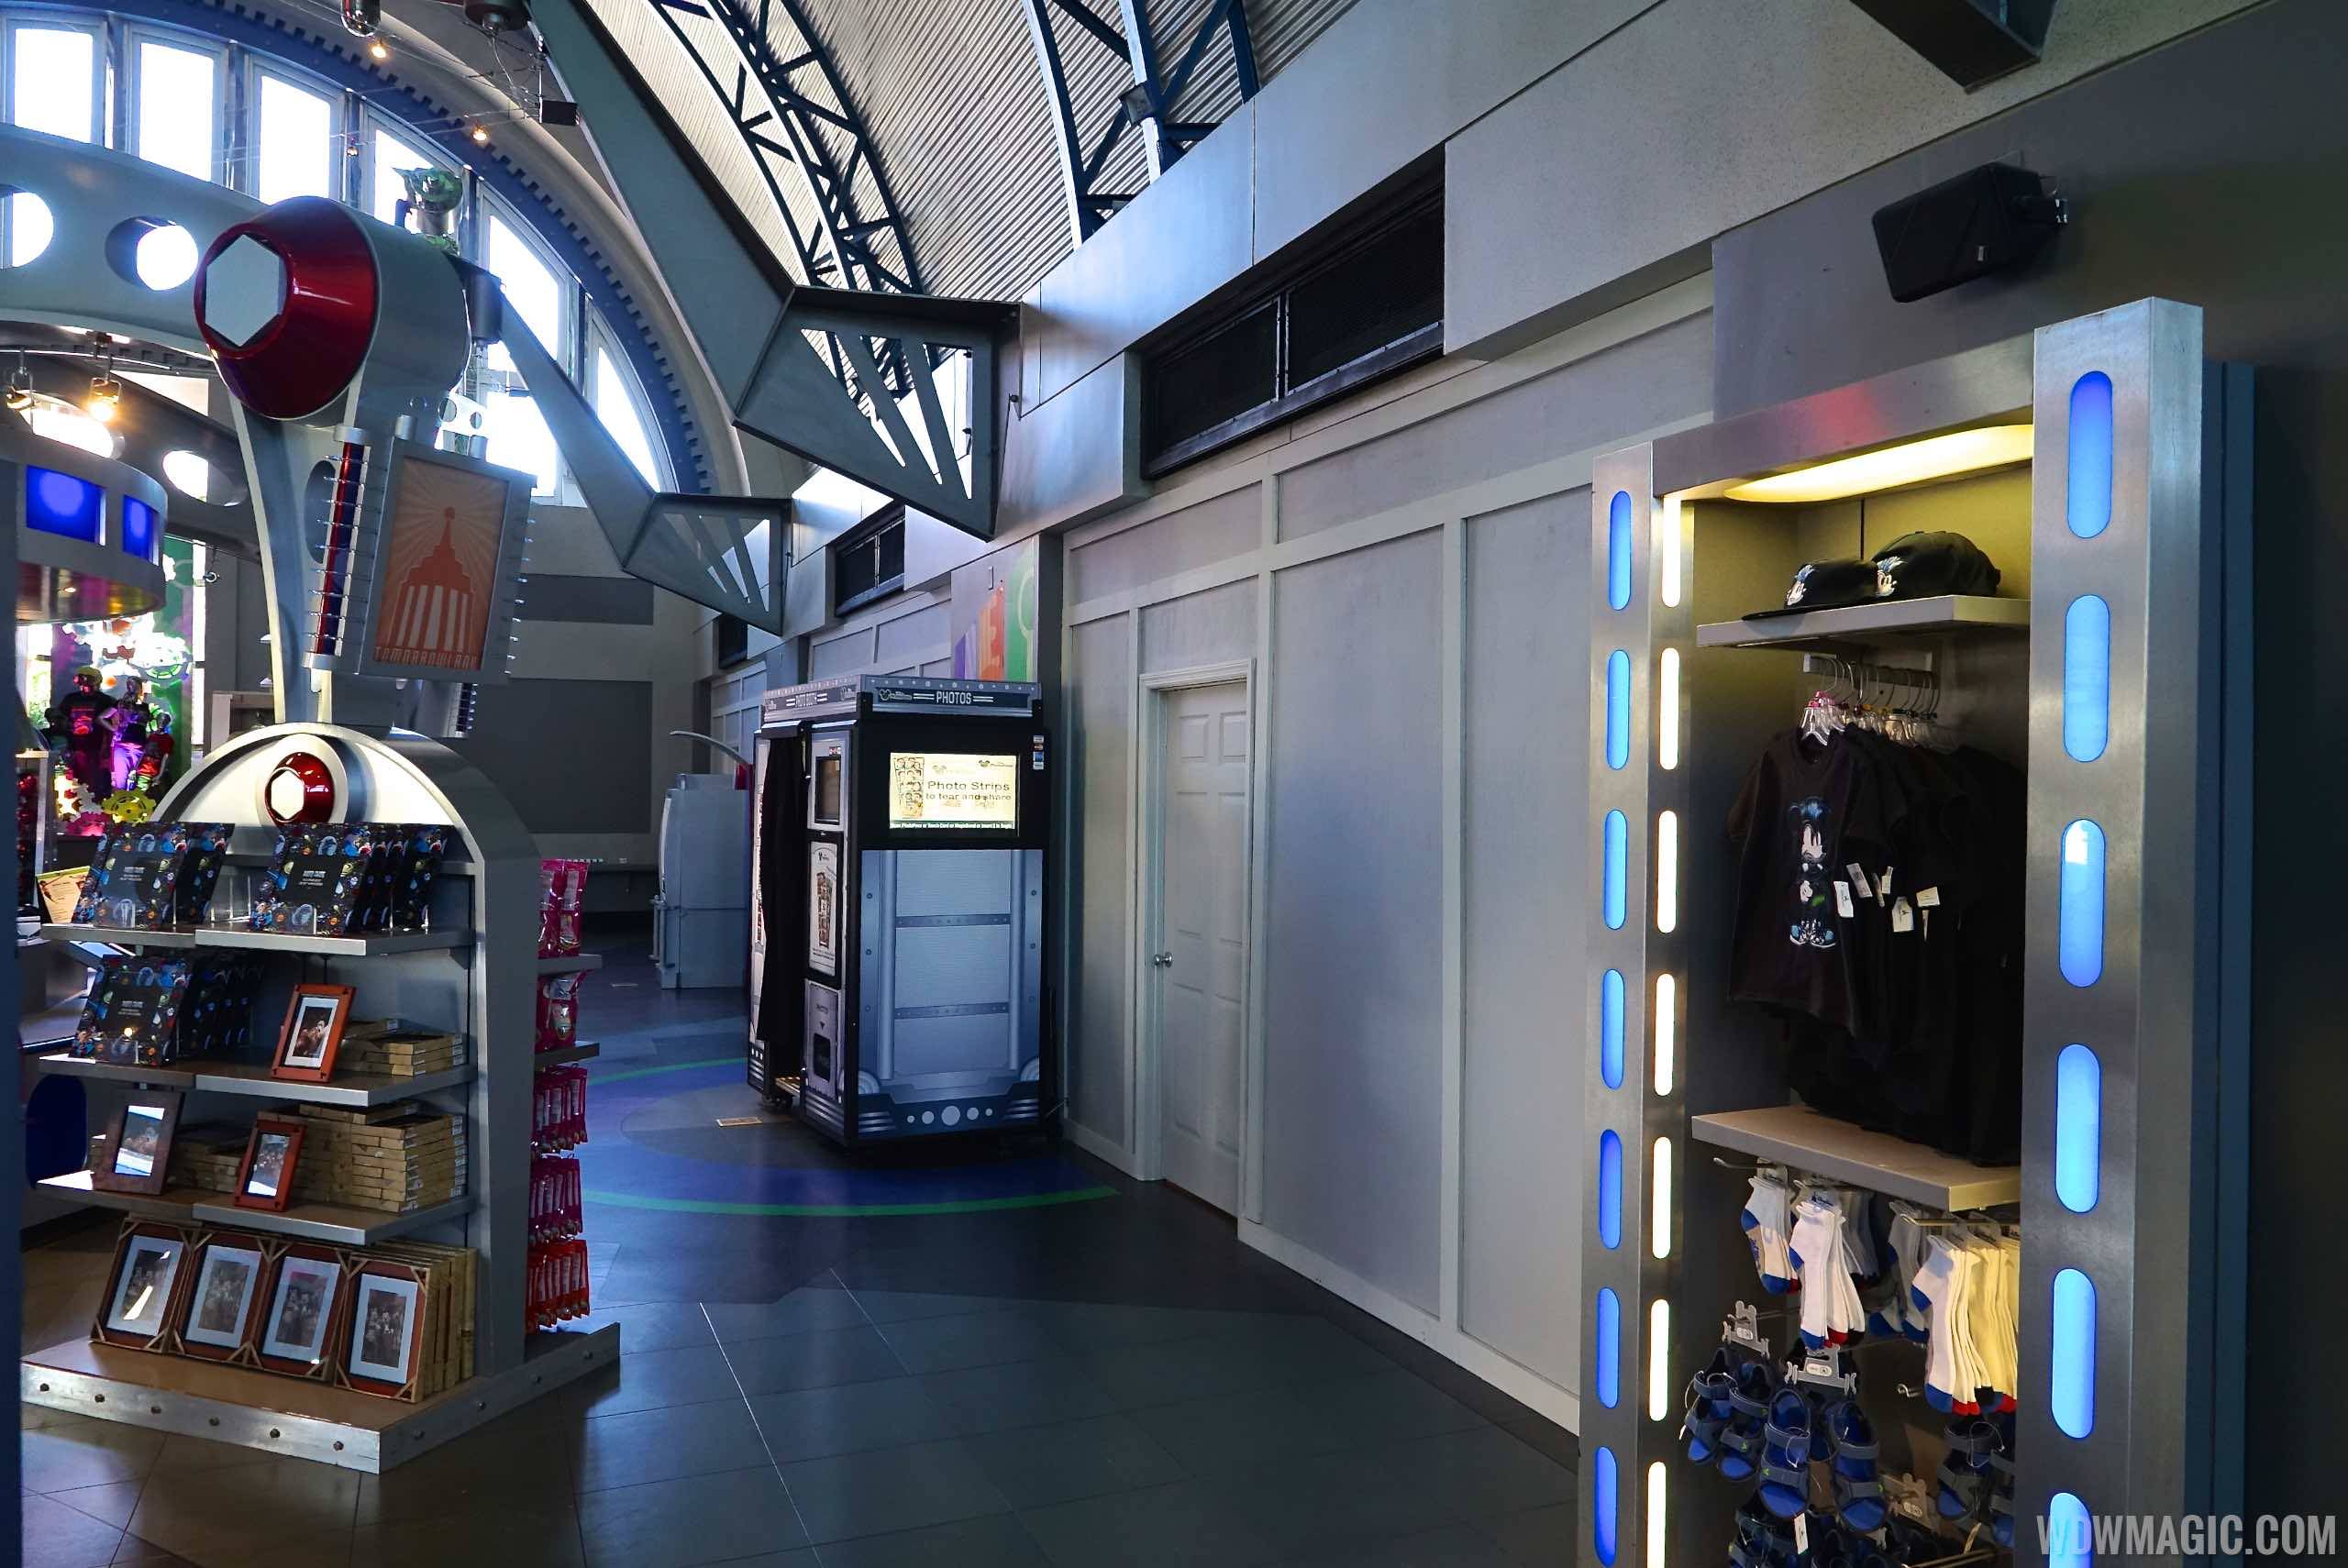 PHOTOS - Work underway at the shuttered Tomorrowland Arcade at the Magic Kingdom